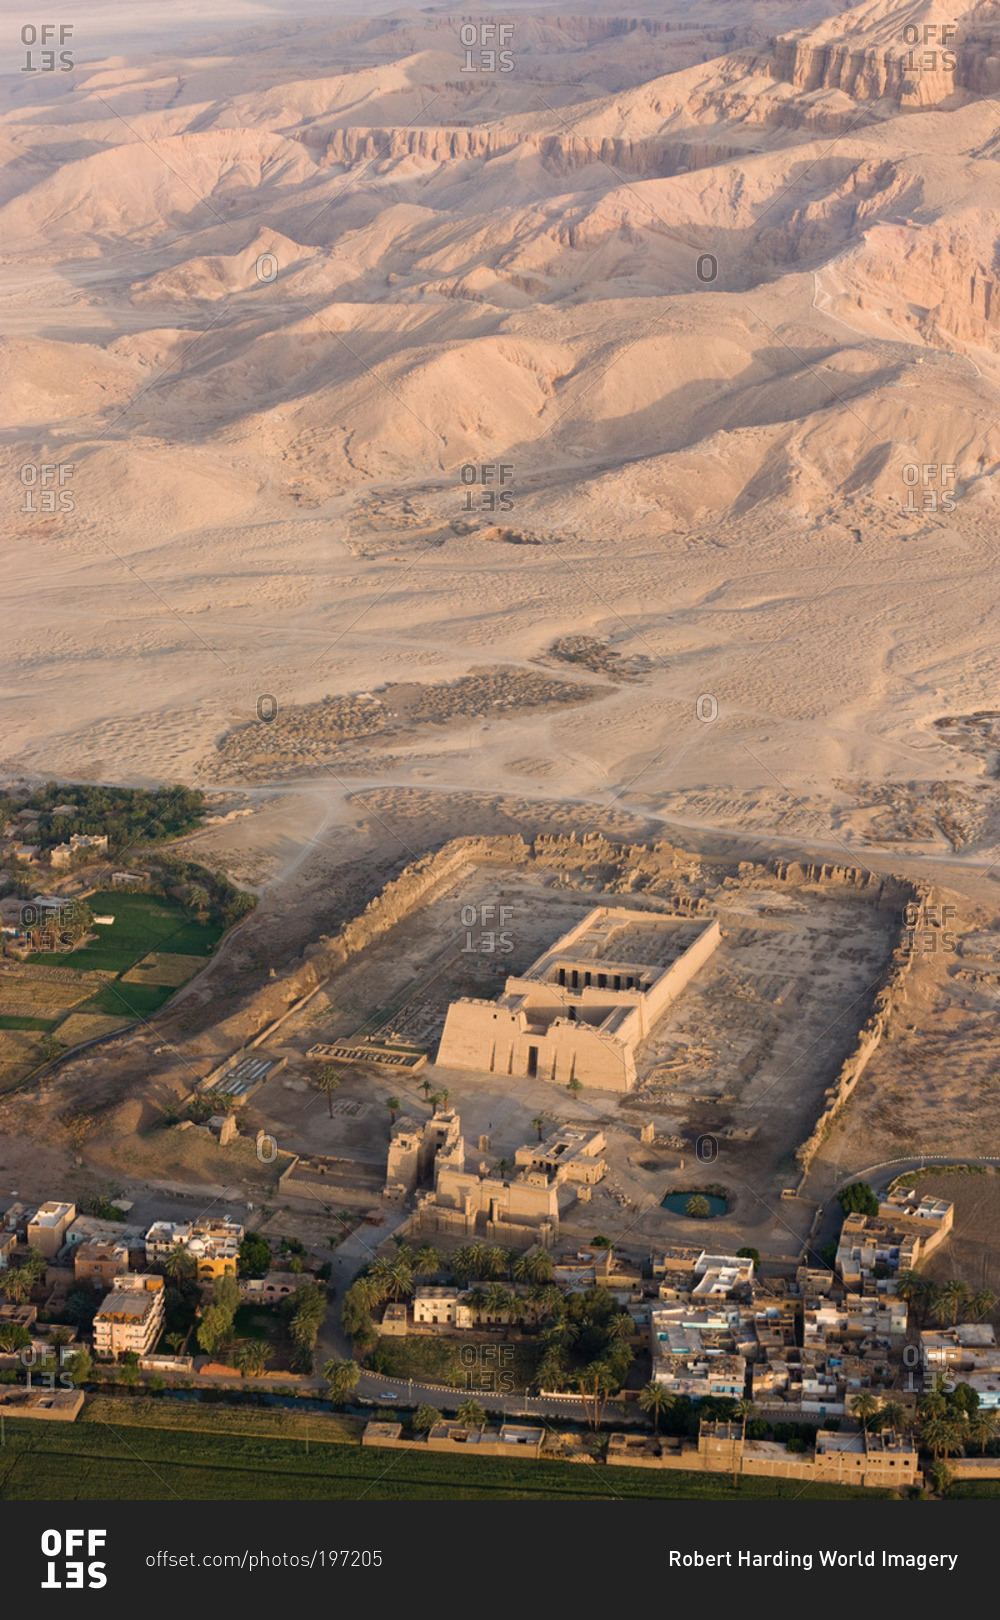 Aerial view of the Mortuary Temple of Ramesses III near Luxor, Egypt